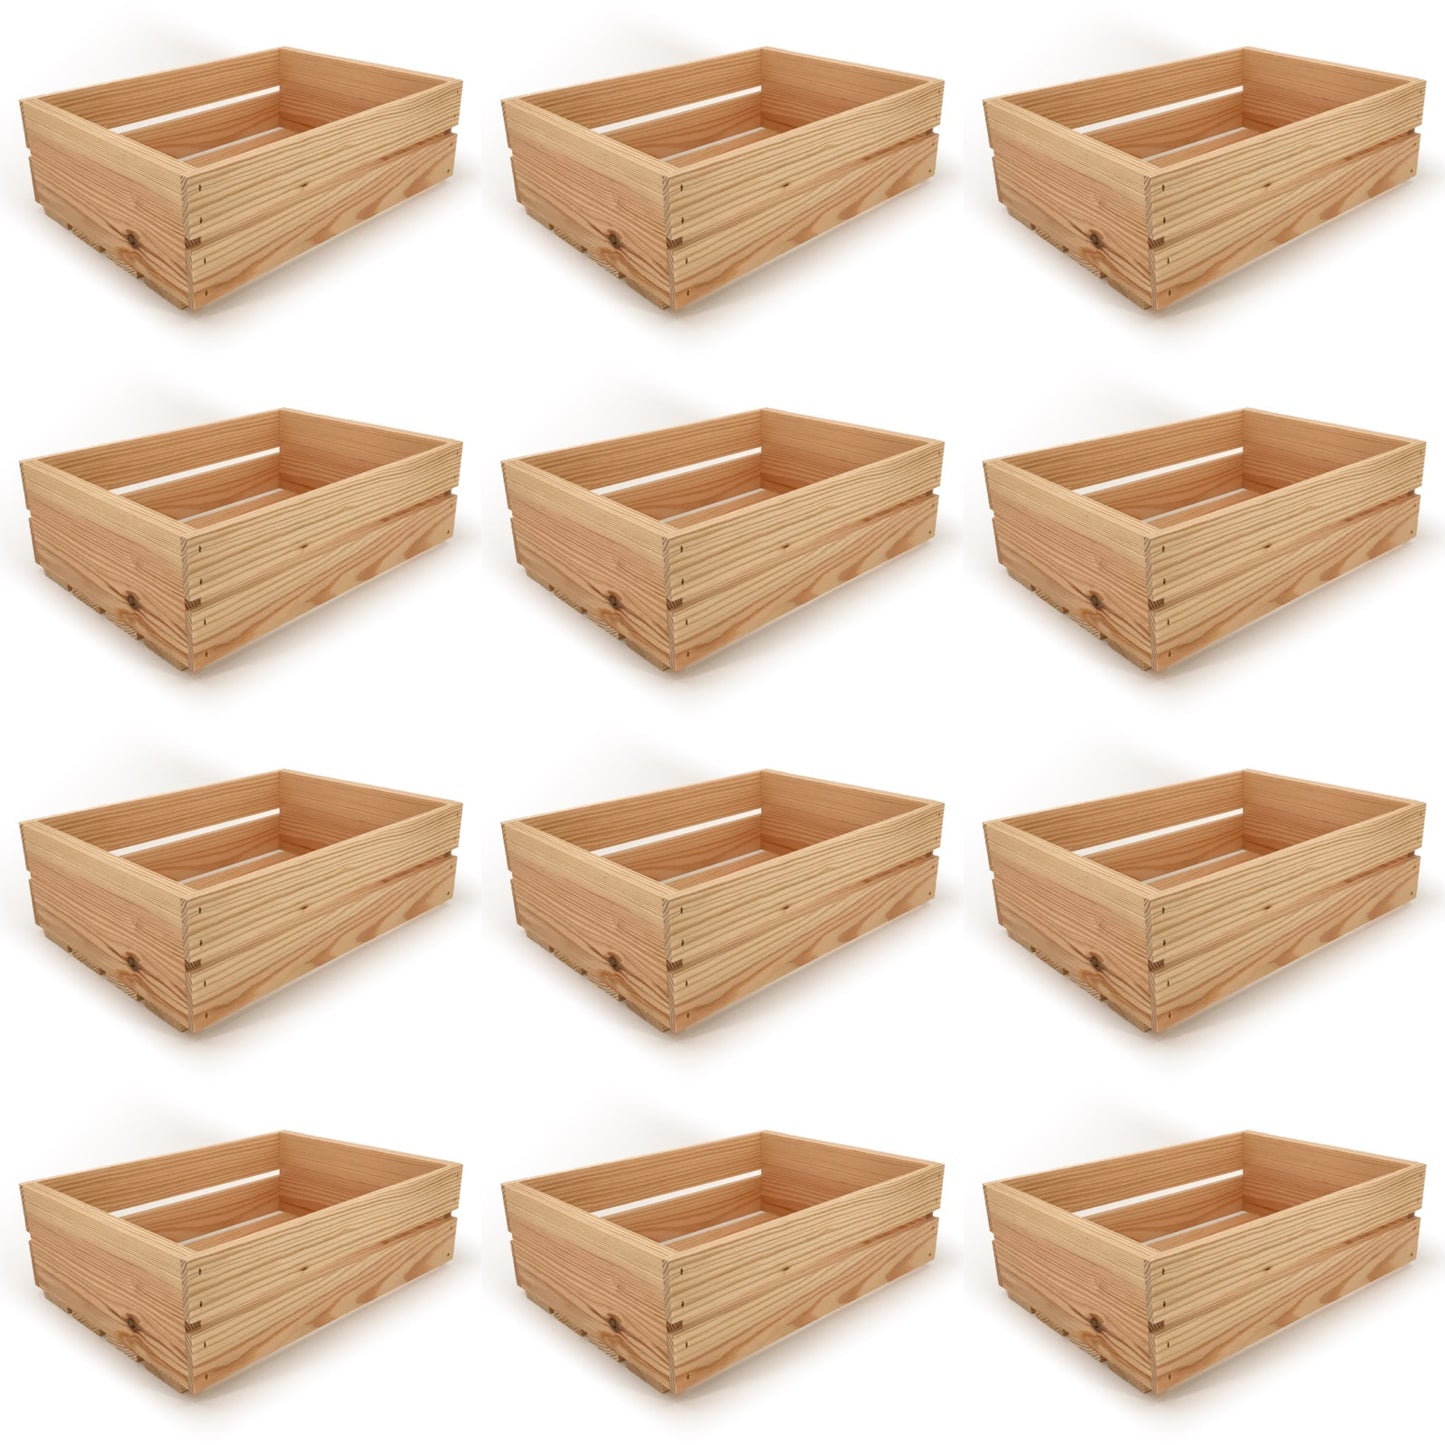 12 Small wooden crates 16x12x5.25